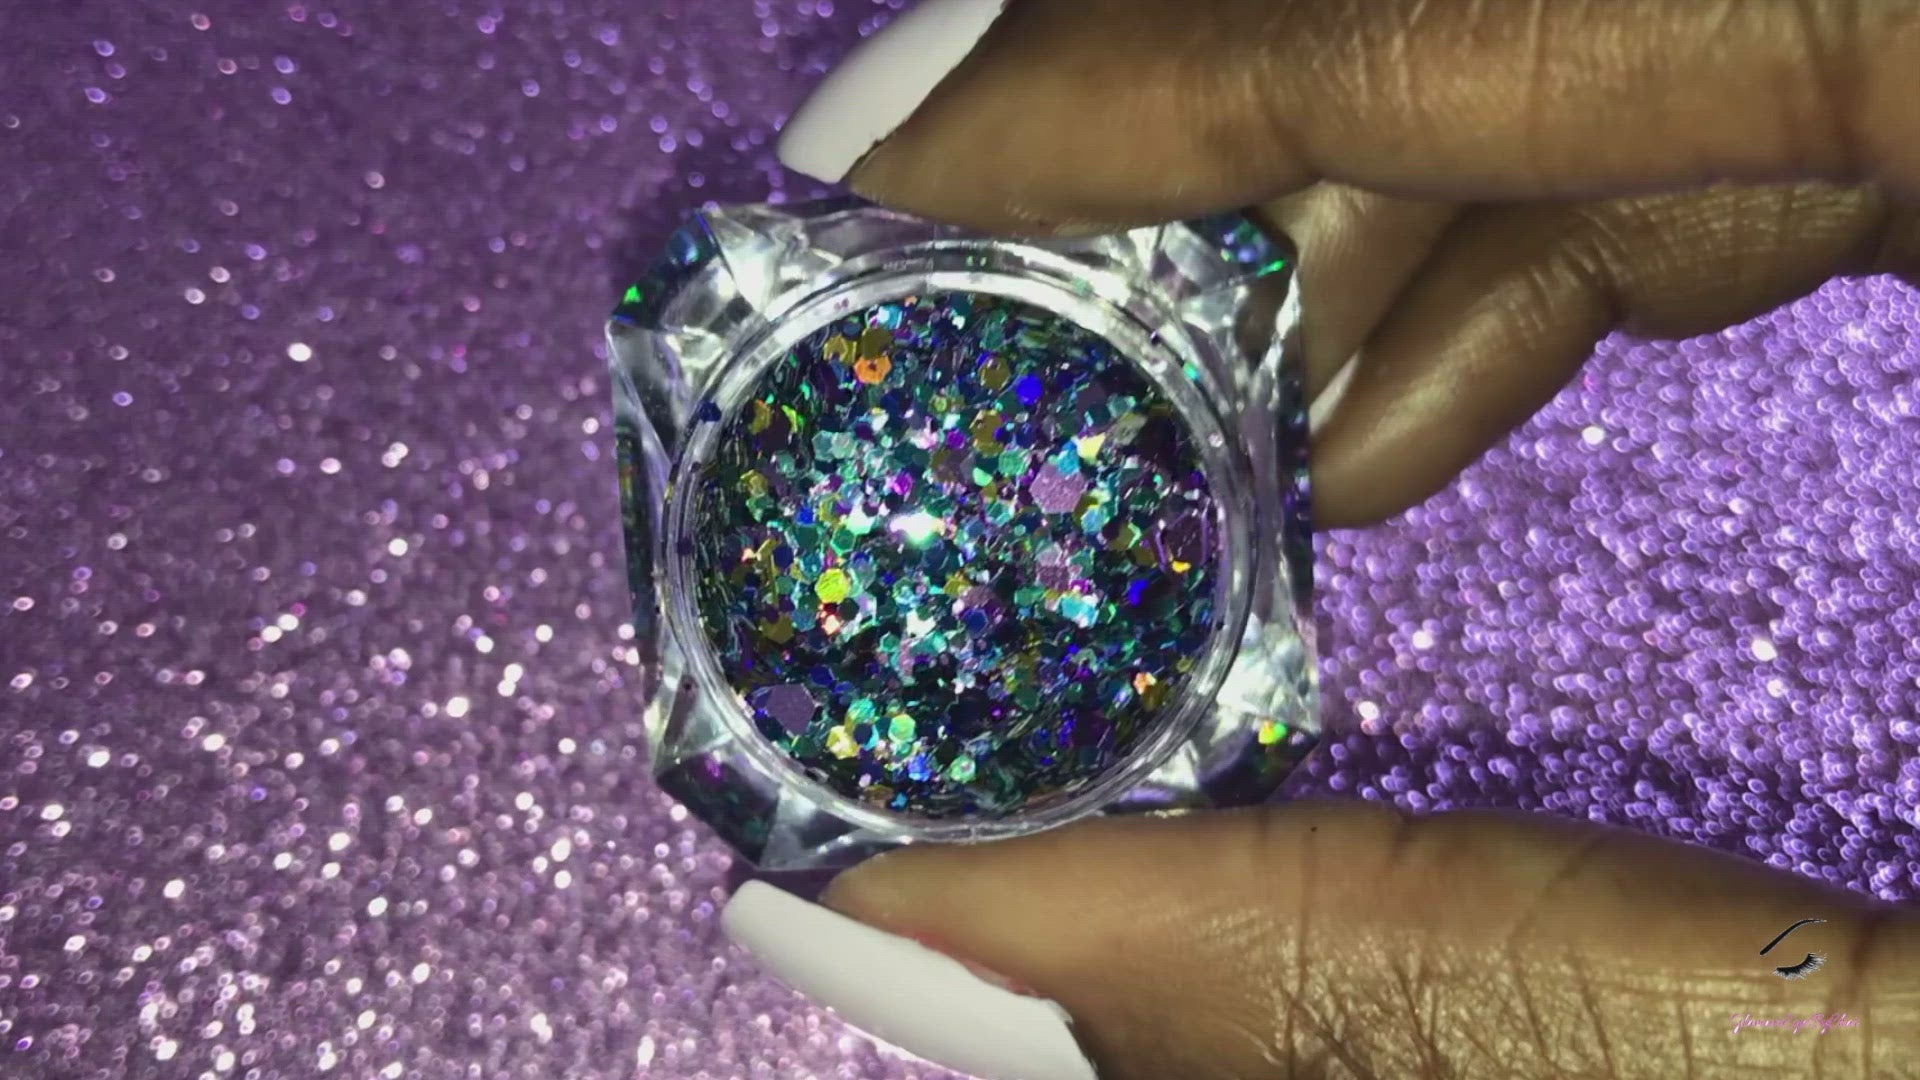 This glitter is called Milky Way and is part of the super chunky glitter collection. It consists of lilac, teal, and gold glitter with a beautiful sparkle. Milky Way can be used for your face, body, hair and nails.